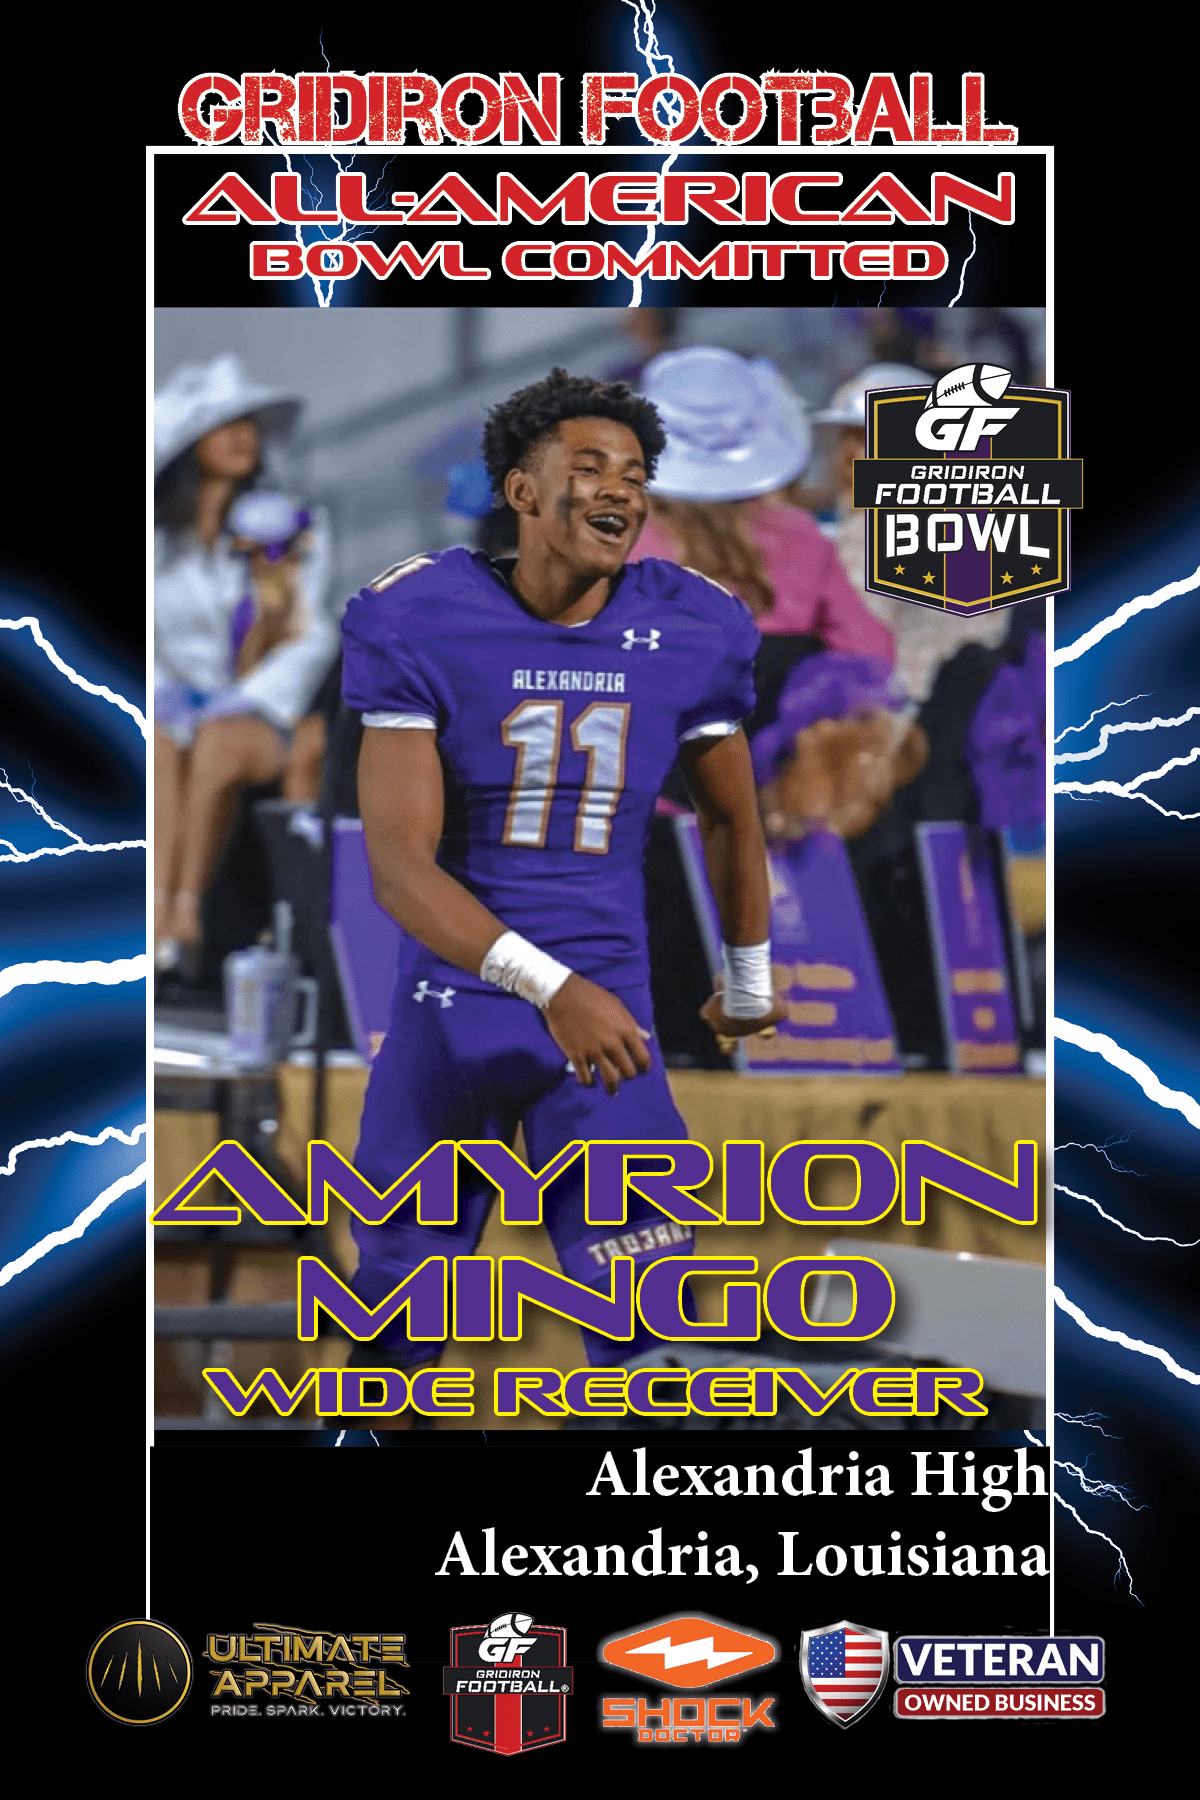 BREAKING NEWS: Alexandria High School (La.) WR Amyrion Mingo has committed to play in the 2023 Gridiron Football All-American Bowl